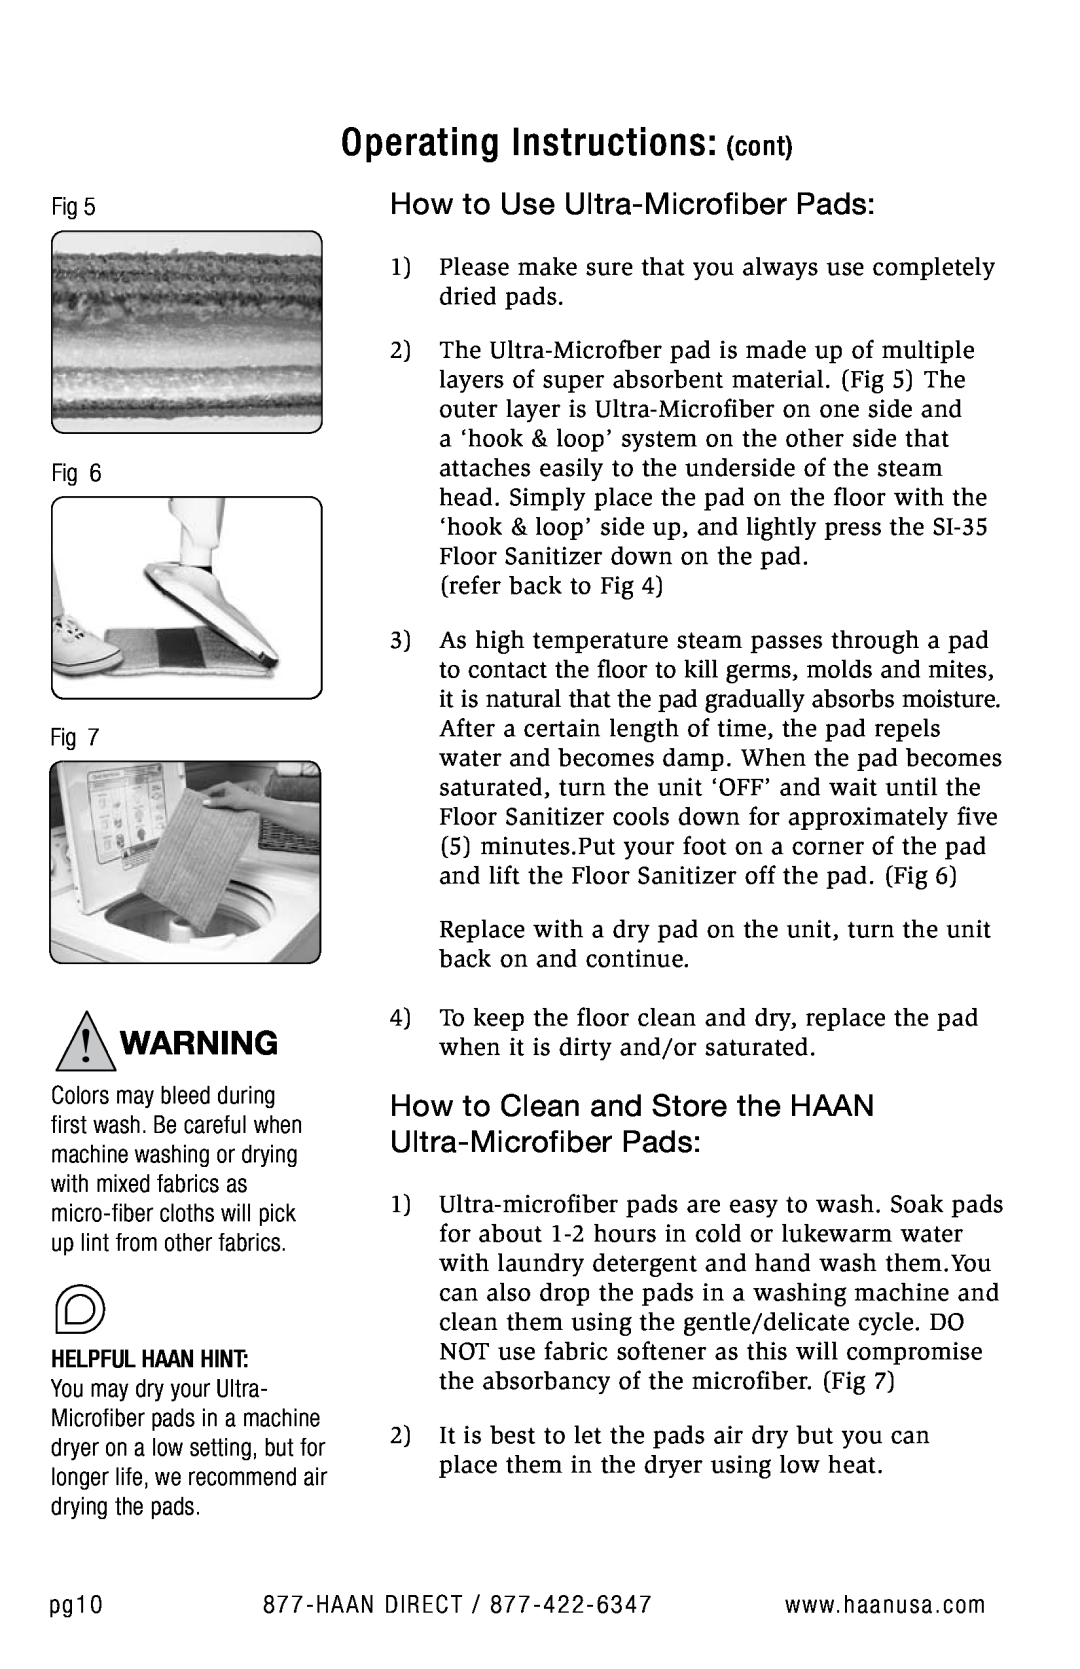 Haan SI-35 user manual How to Use Ultra-MicrofiberPads, Operating Instructions cont 